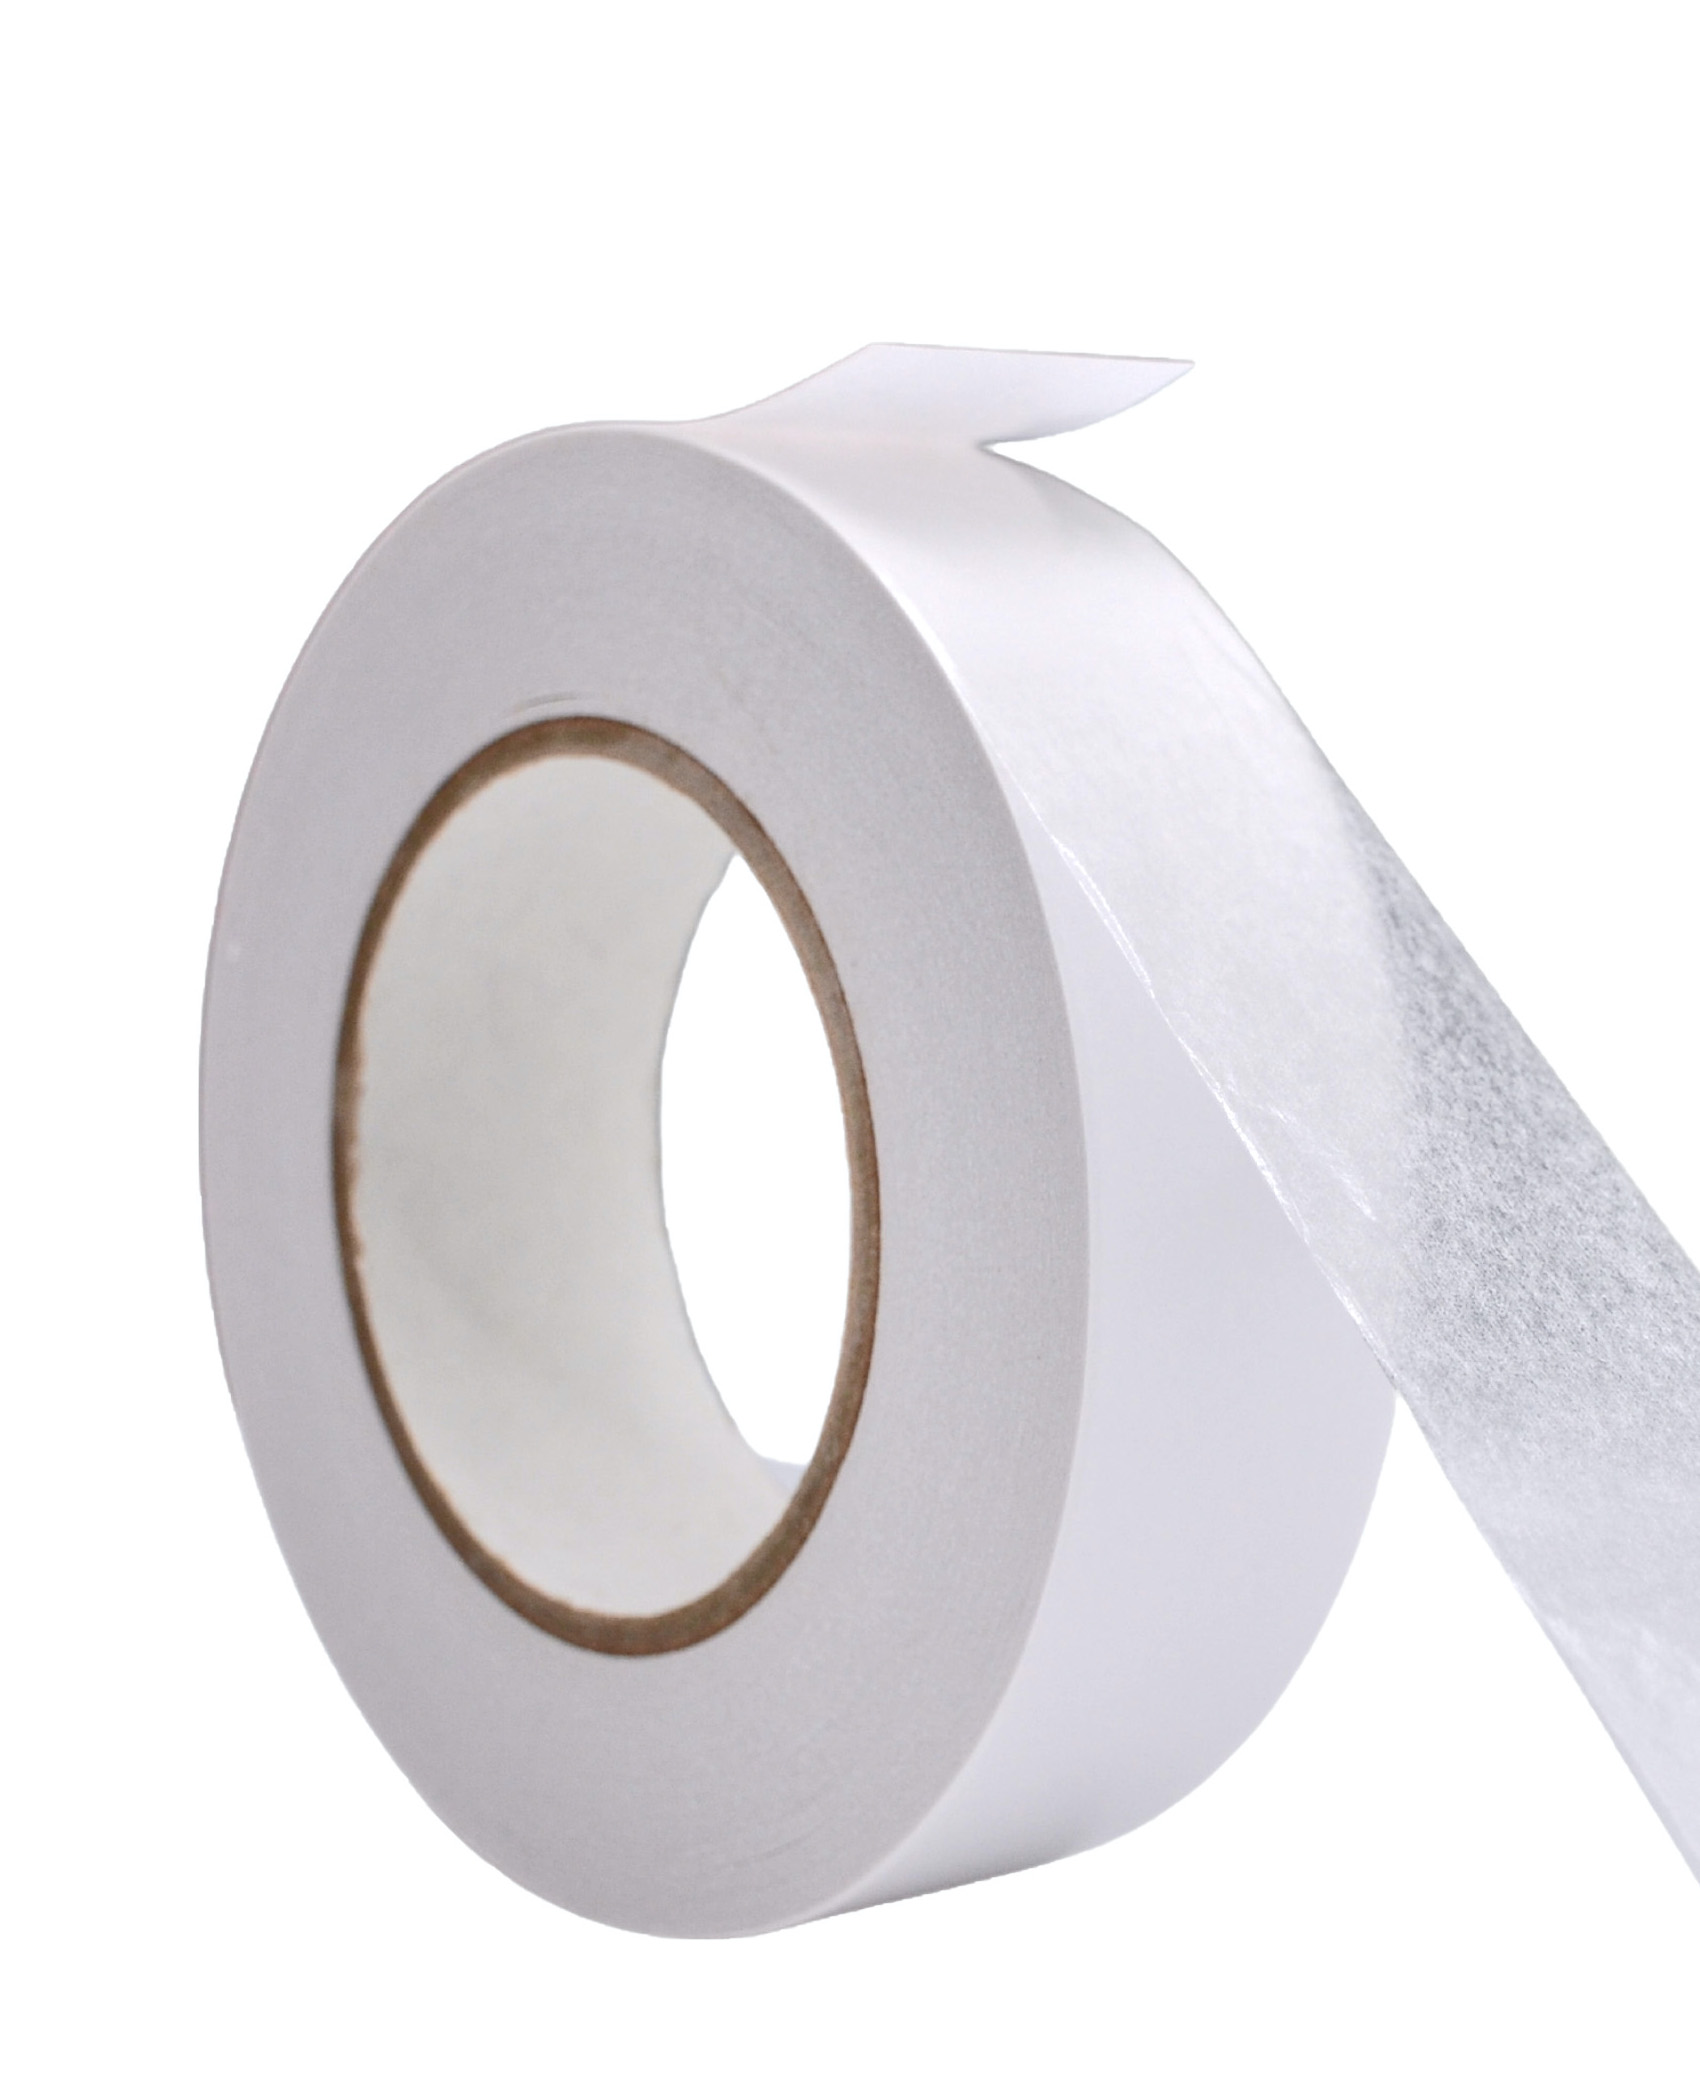 WOD Tape Double Sided Tissue Craft Adhesive Tape 1 in. x 55 yd. Gift Wrap